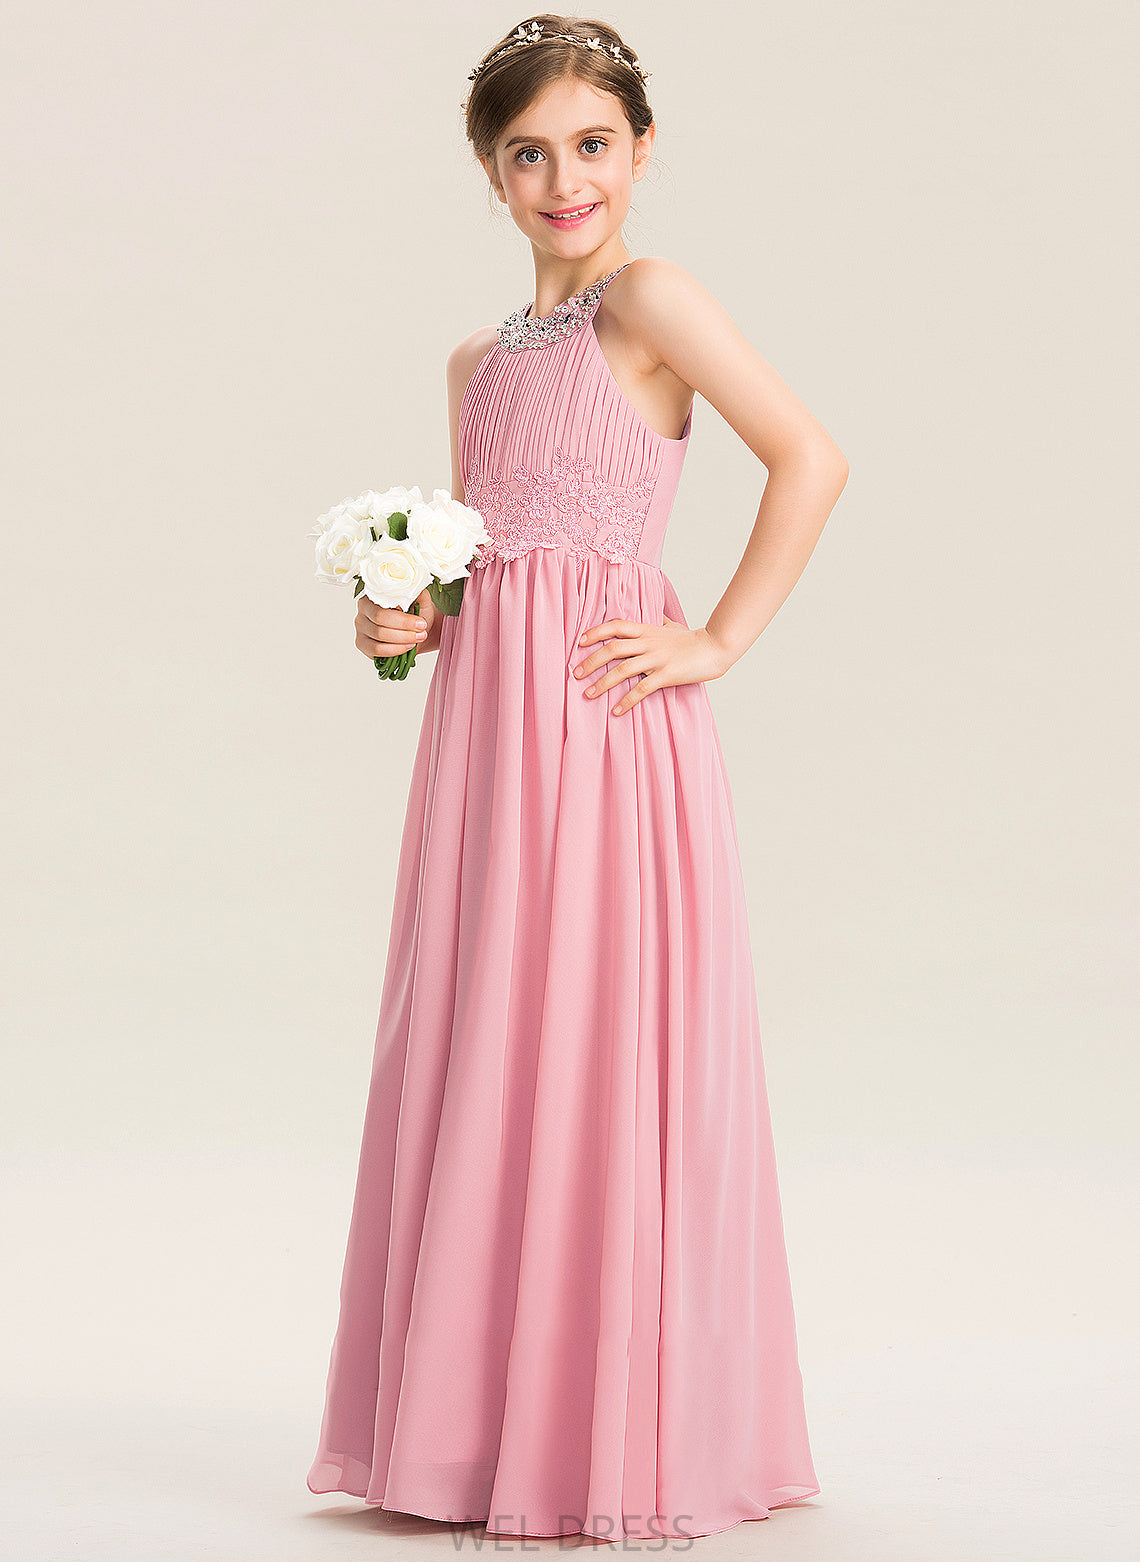 Lace Sequins Neck Junior Bridesmaid Dresses With Scoop Chiffon Floor-Length Ruffle Beading A-Line Luz